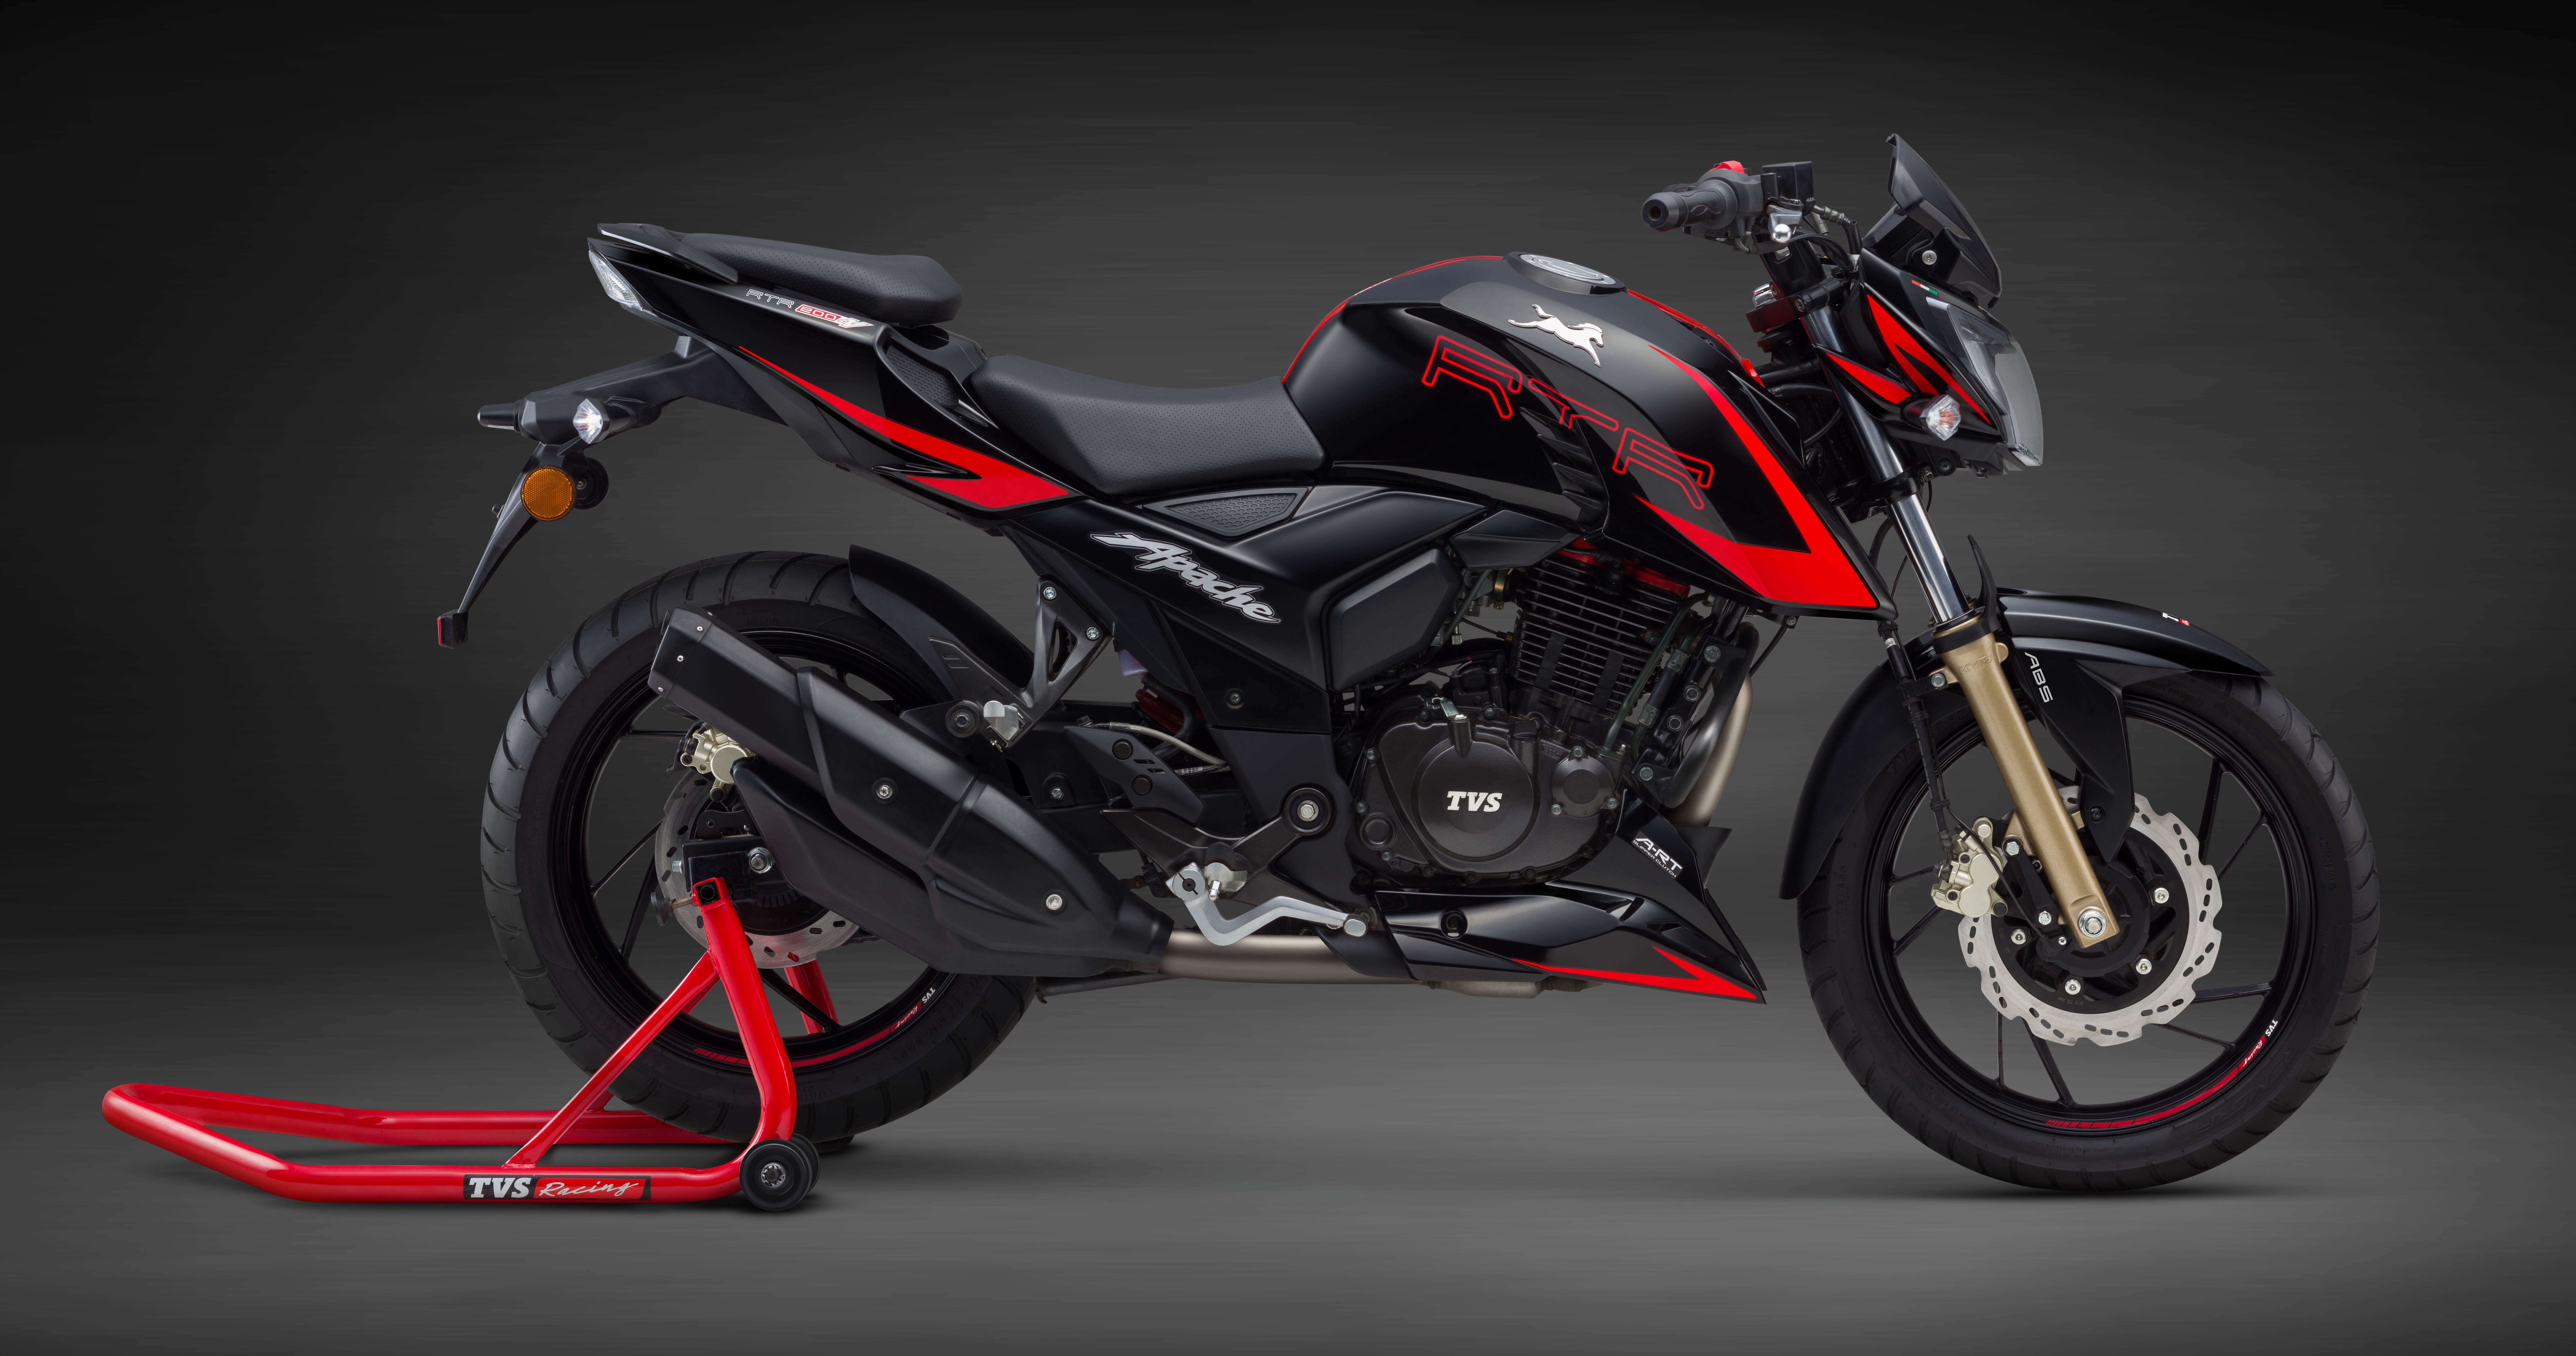 Tvs Motor Tvs Motor Launches Apache Rtr 200 4v With New Clutch